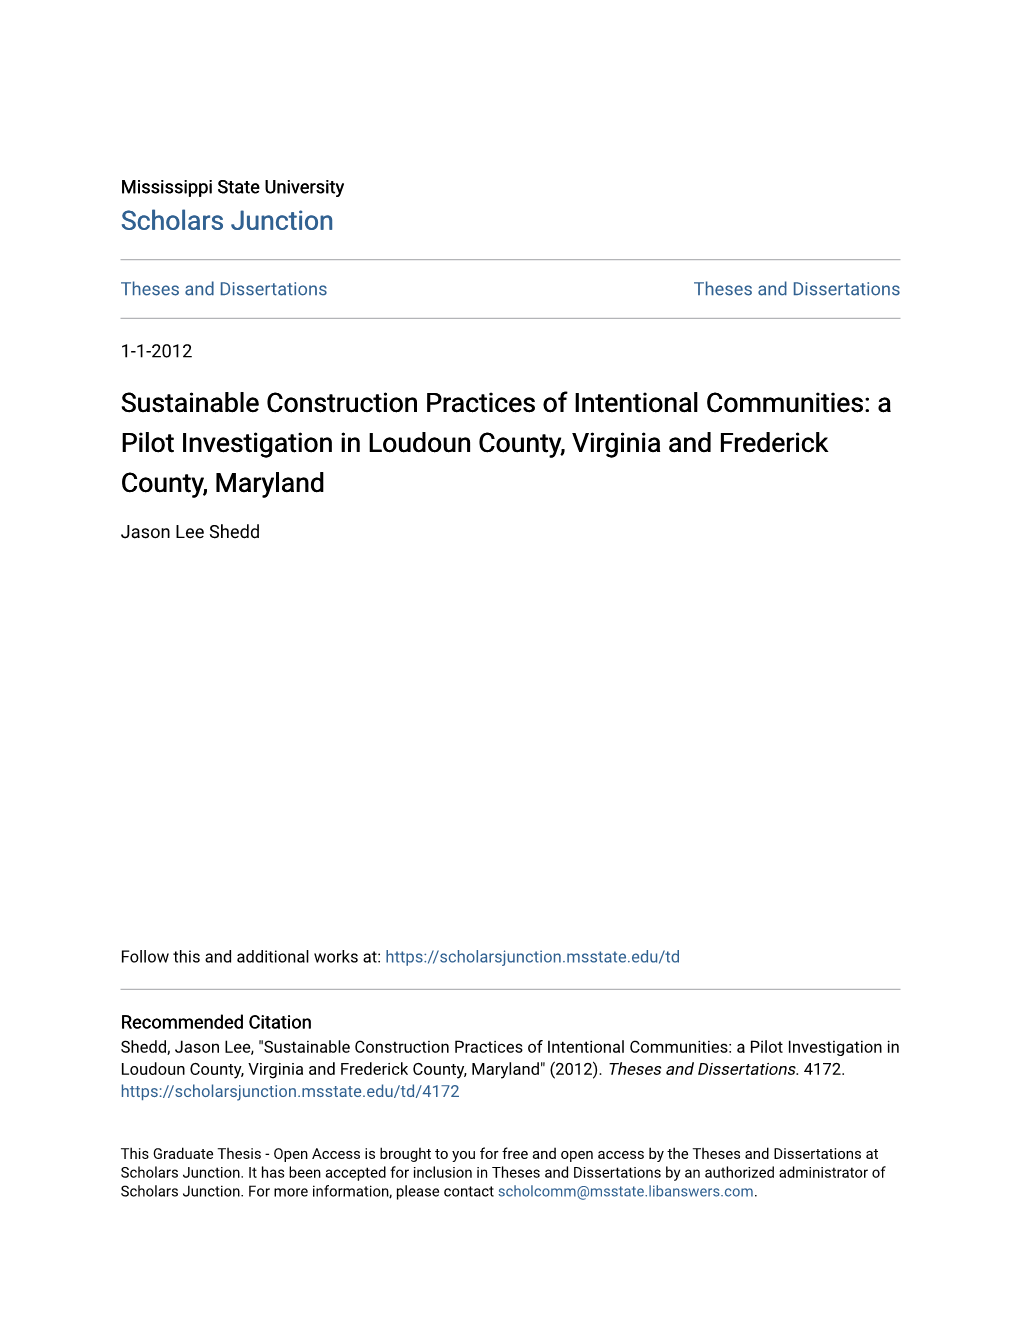 Sustainable Construction Practices of Intentional Communities: a Pilot Investigation in Loudoun County, Virginia and Frederick County, Maryland